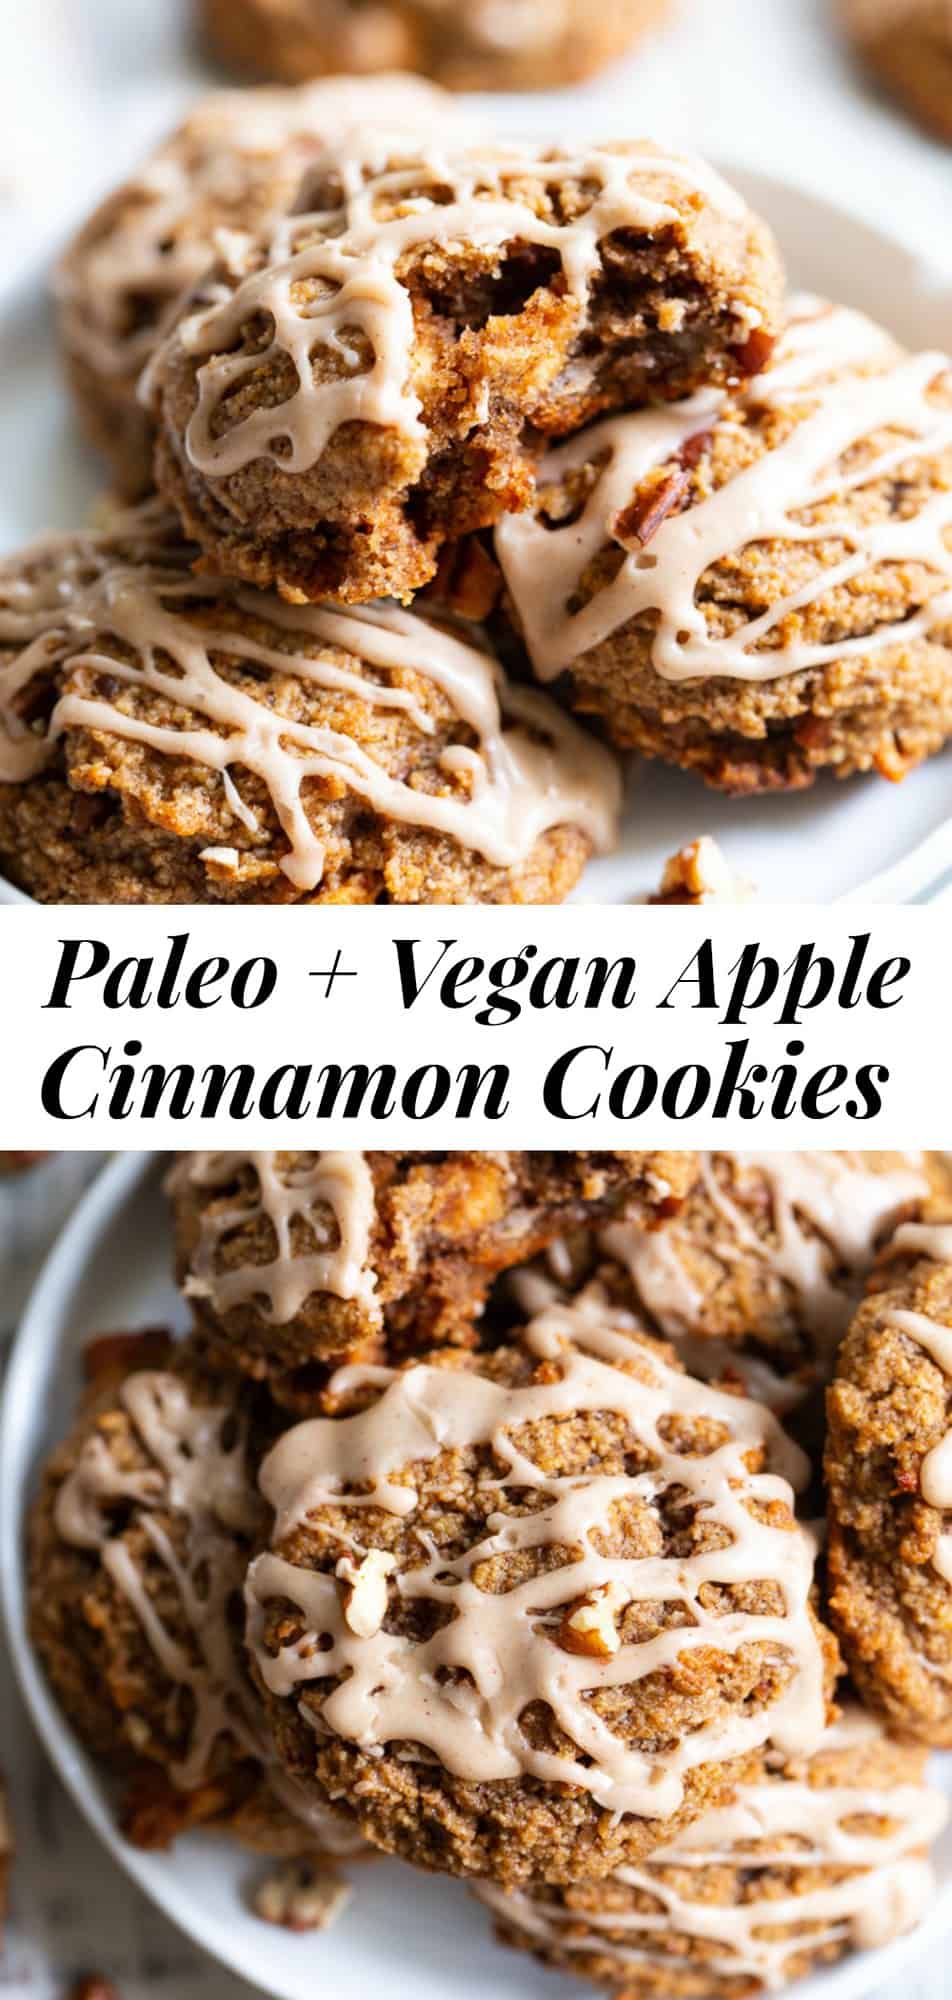 These soft and chewy pecan apple cinnamon cookies have it all!  Gluten-free, paleo, and vegan cookies packed with warm spices, chewy dried apples, chopped pecans and maple icing in every bite!  They're kid approved, fun to make and make an incredibly delicious fall dessert! #paleo #vegan #paleobaking #cleaneating